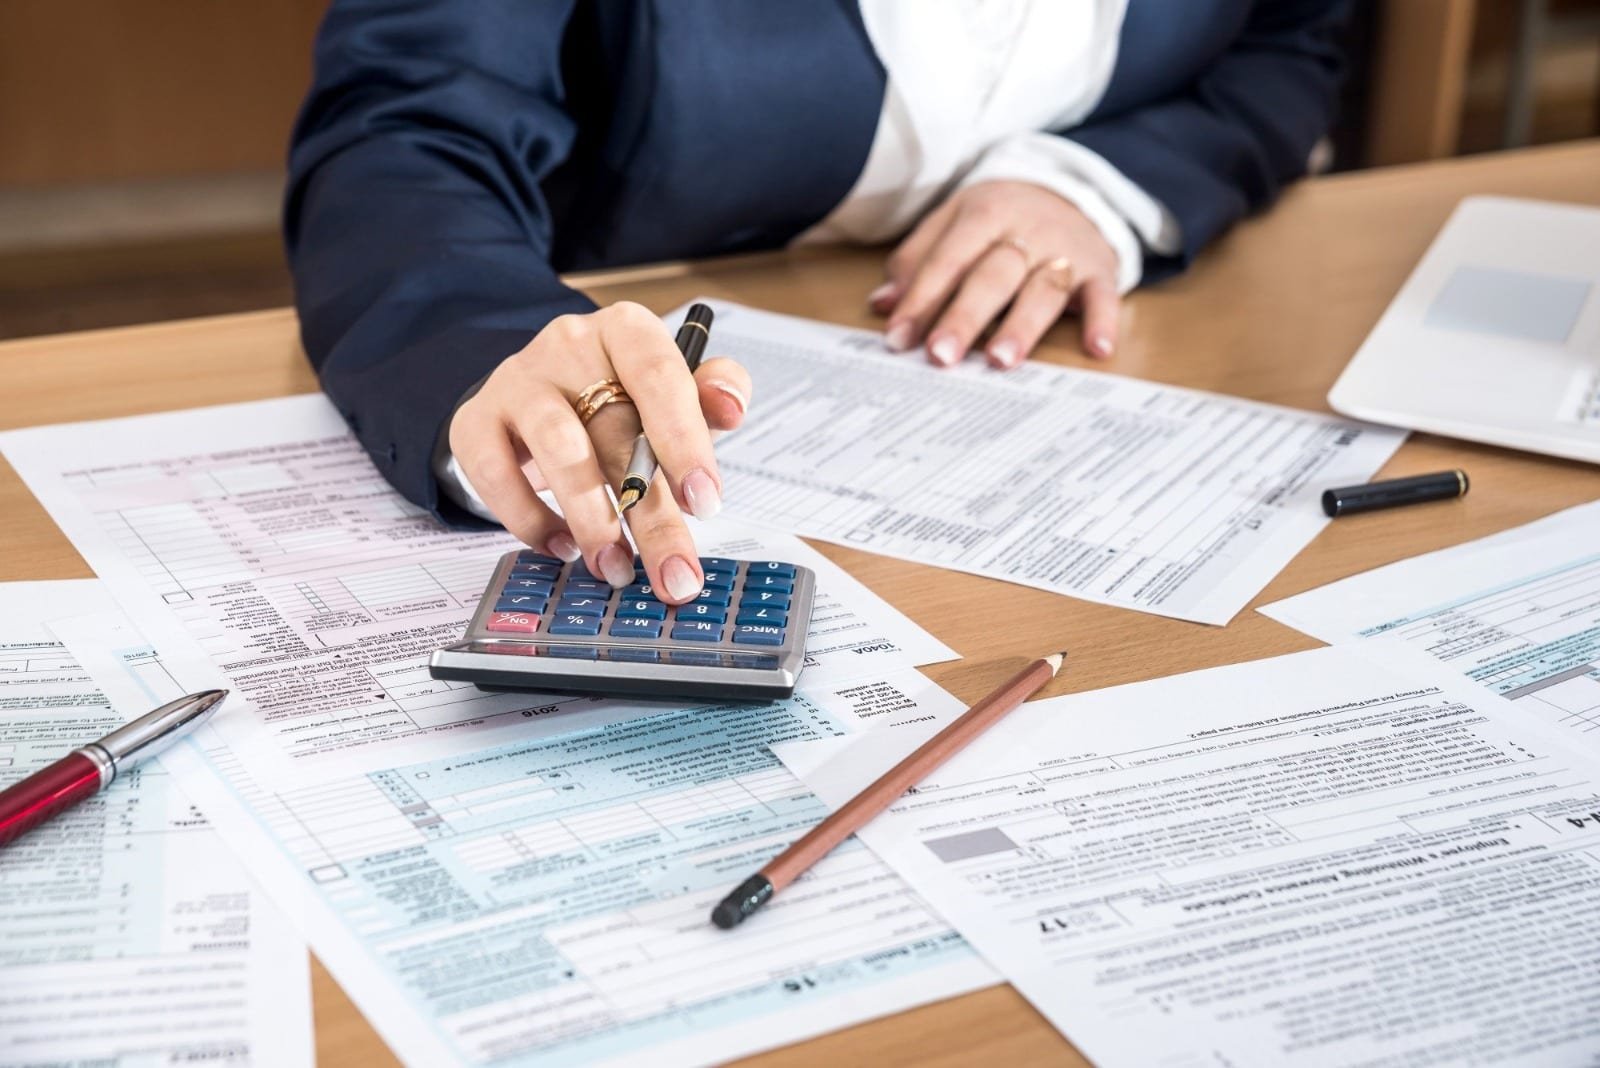 5 Benefits Of Working With A Professional Accountant